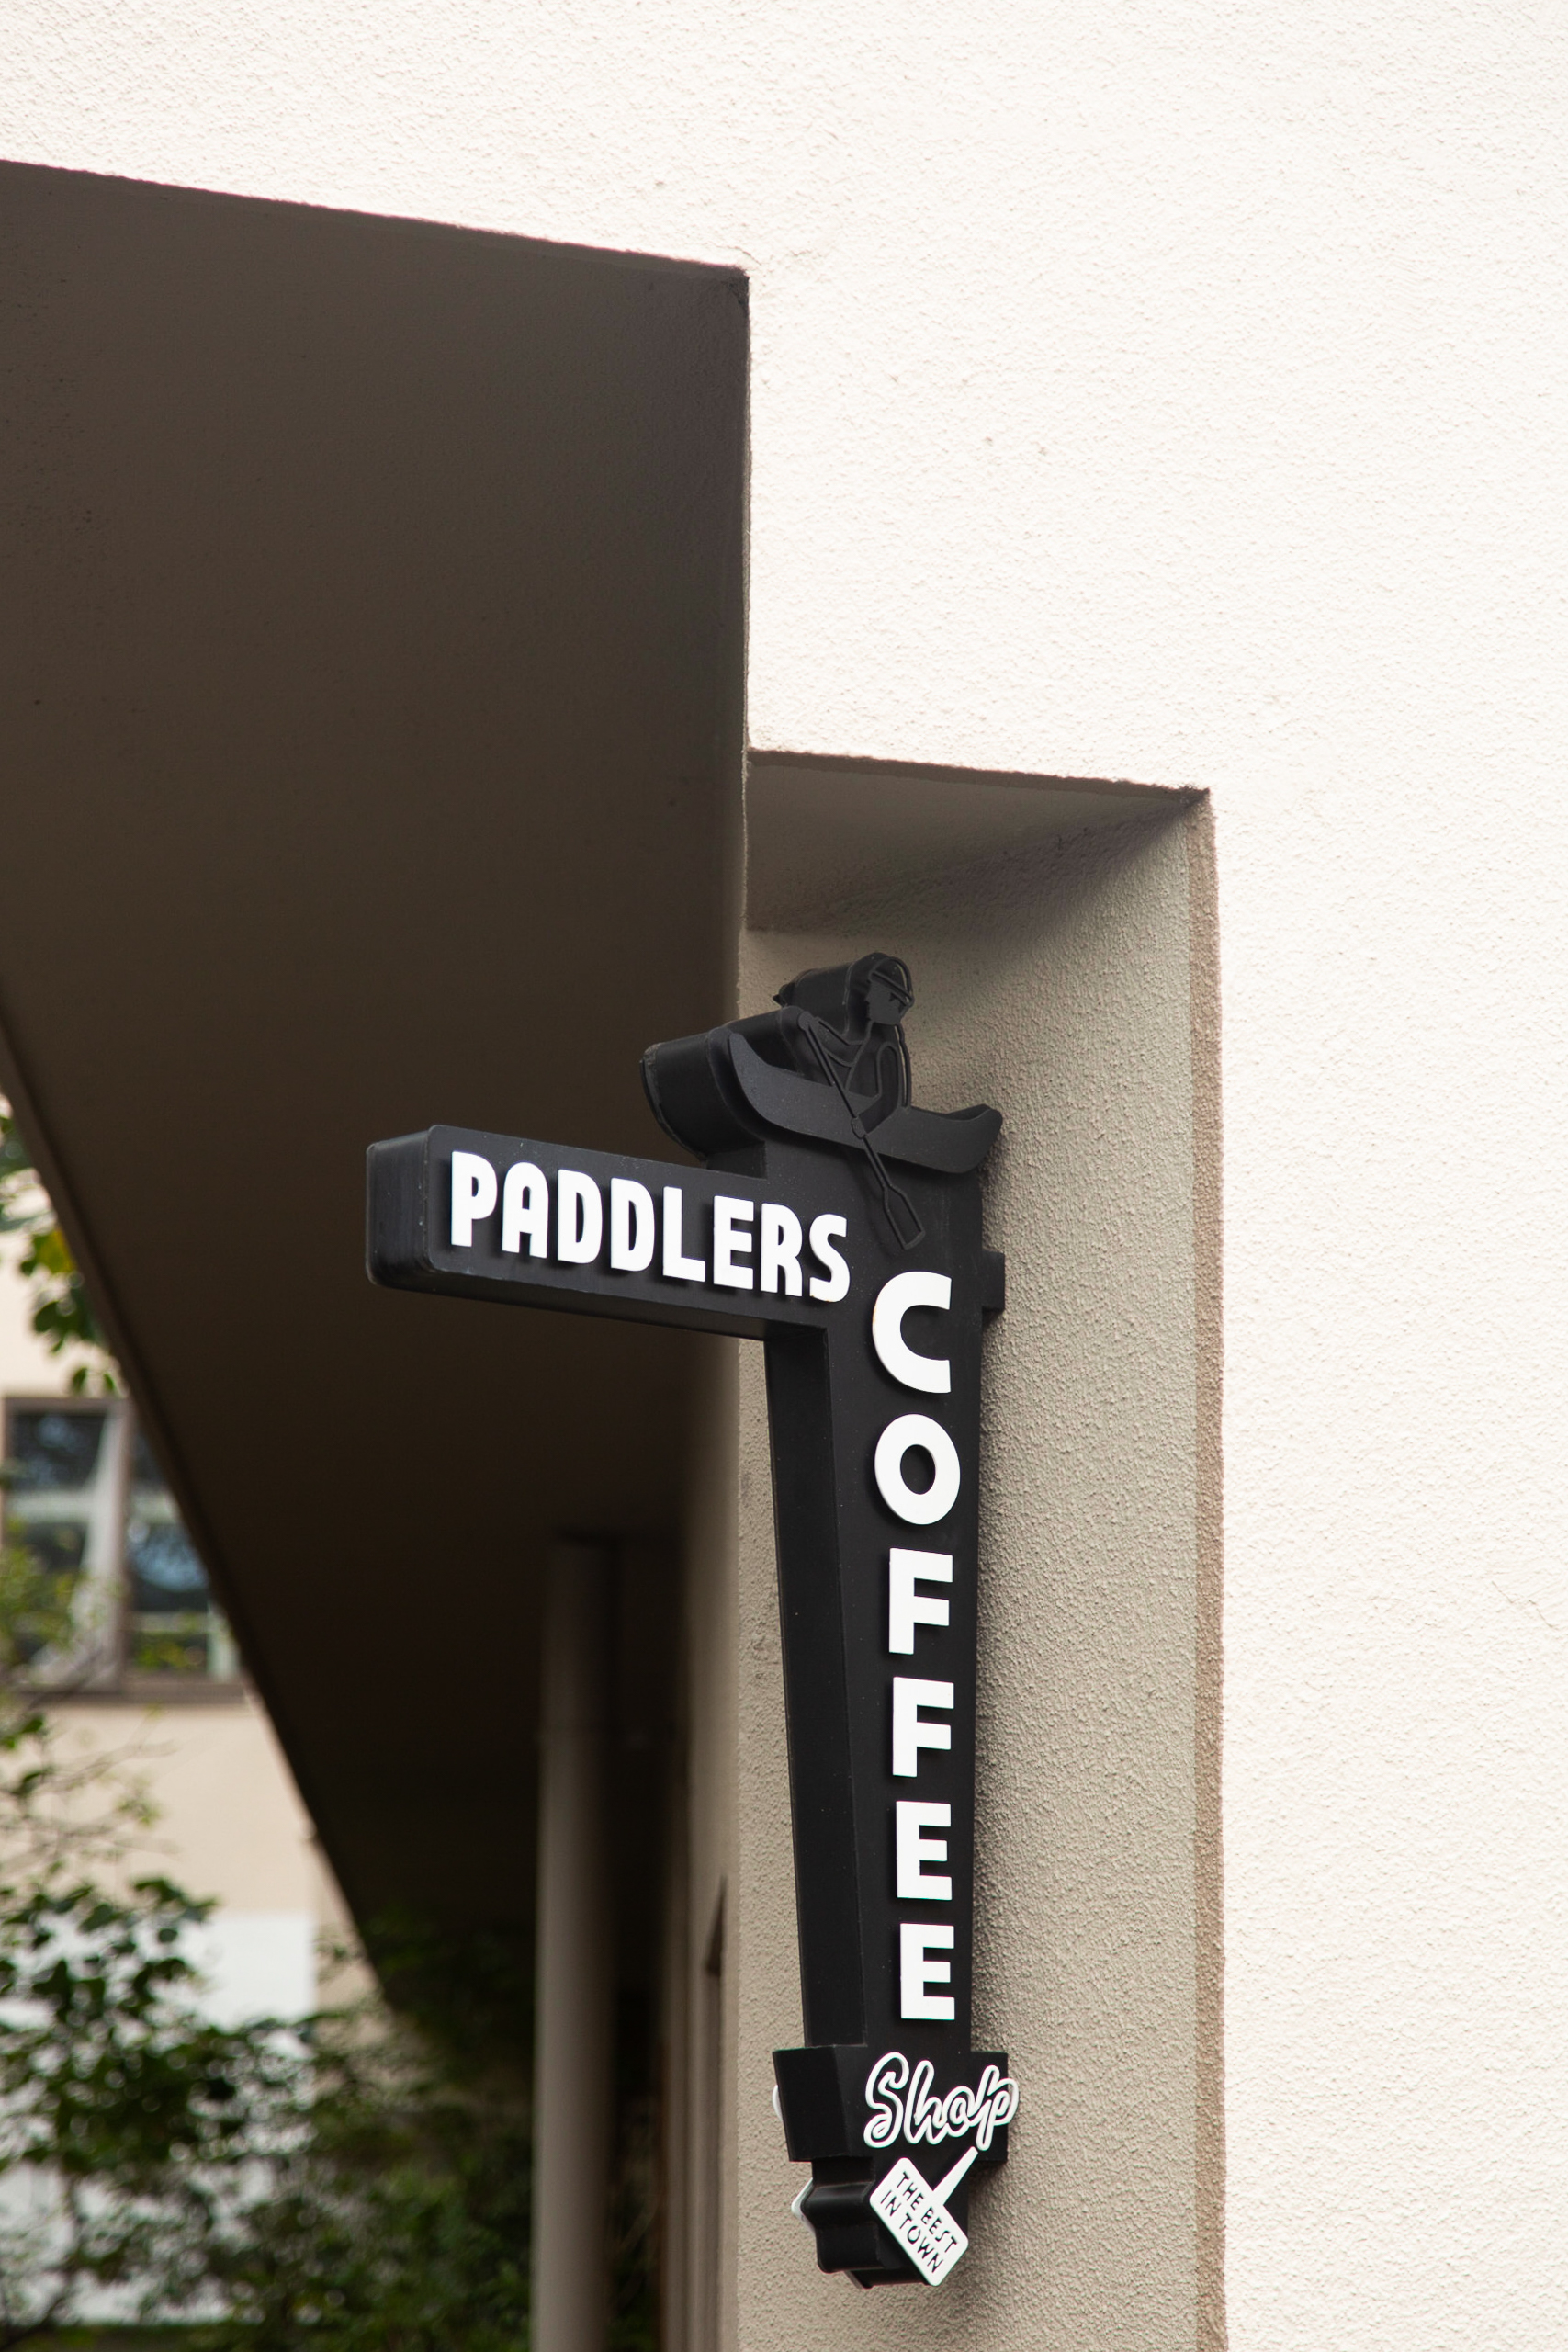 Paddlers Coffee Brought the Spirit of Portland and Coffee